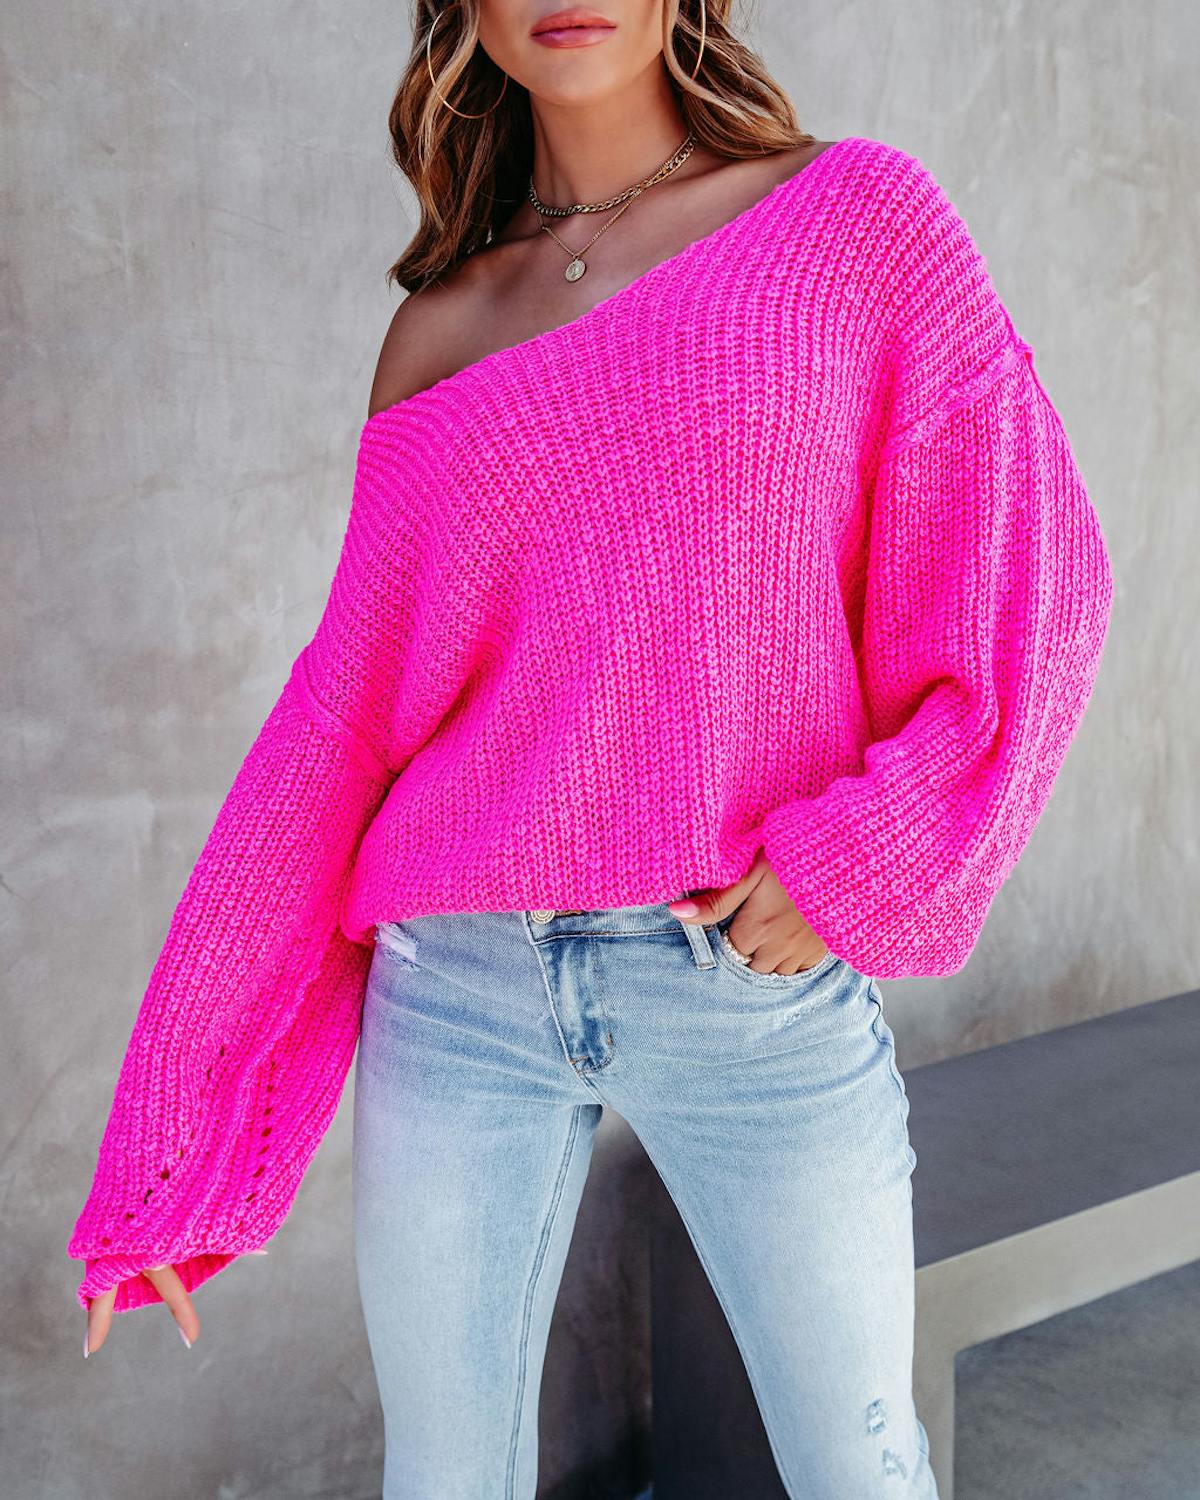 Breezy Fun Knit V-Neck Sweater - Hot Pink view 1